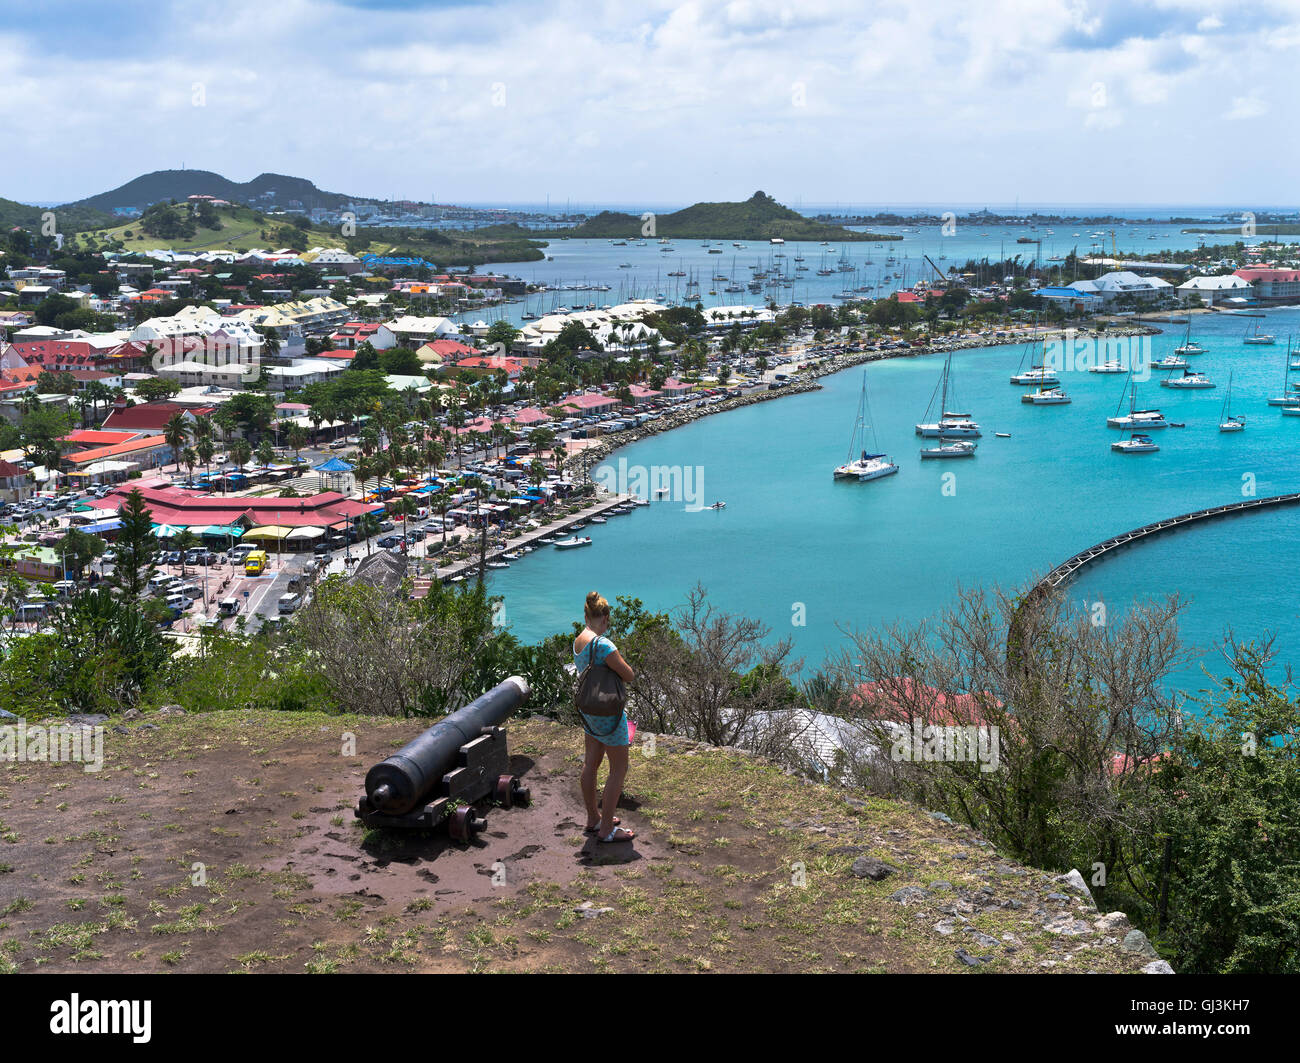 dh Marigot fort louis st martin SAINT MARTIN CARIBBEAN Tourist woman cannon port bay waterfront french town west indies Stock Photo